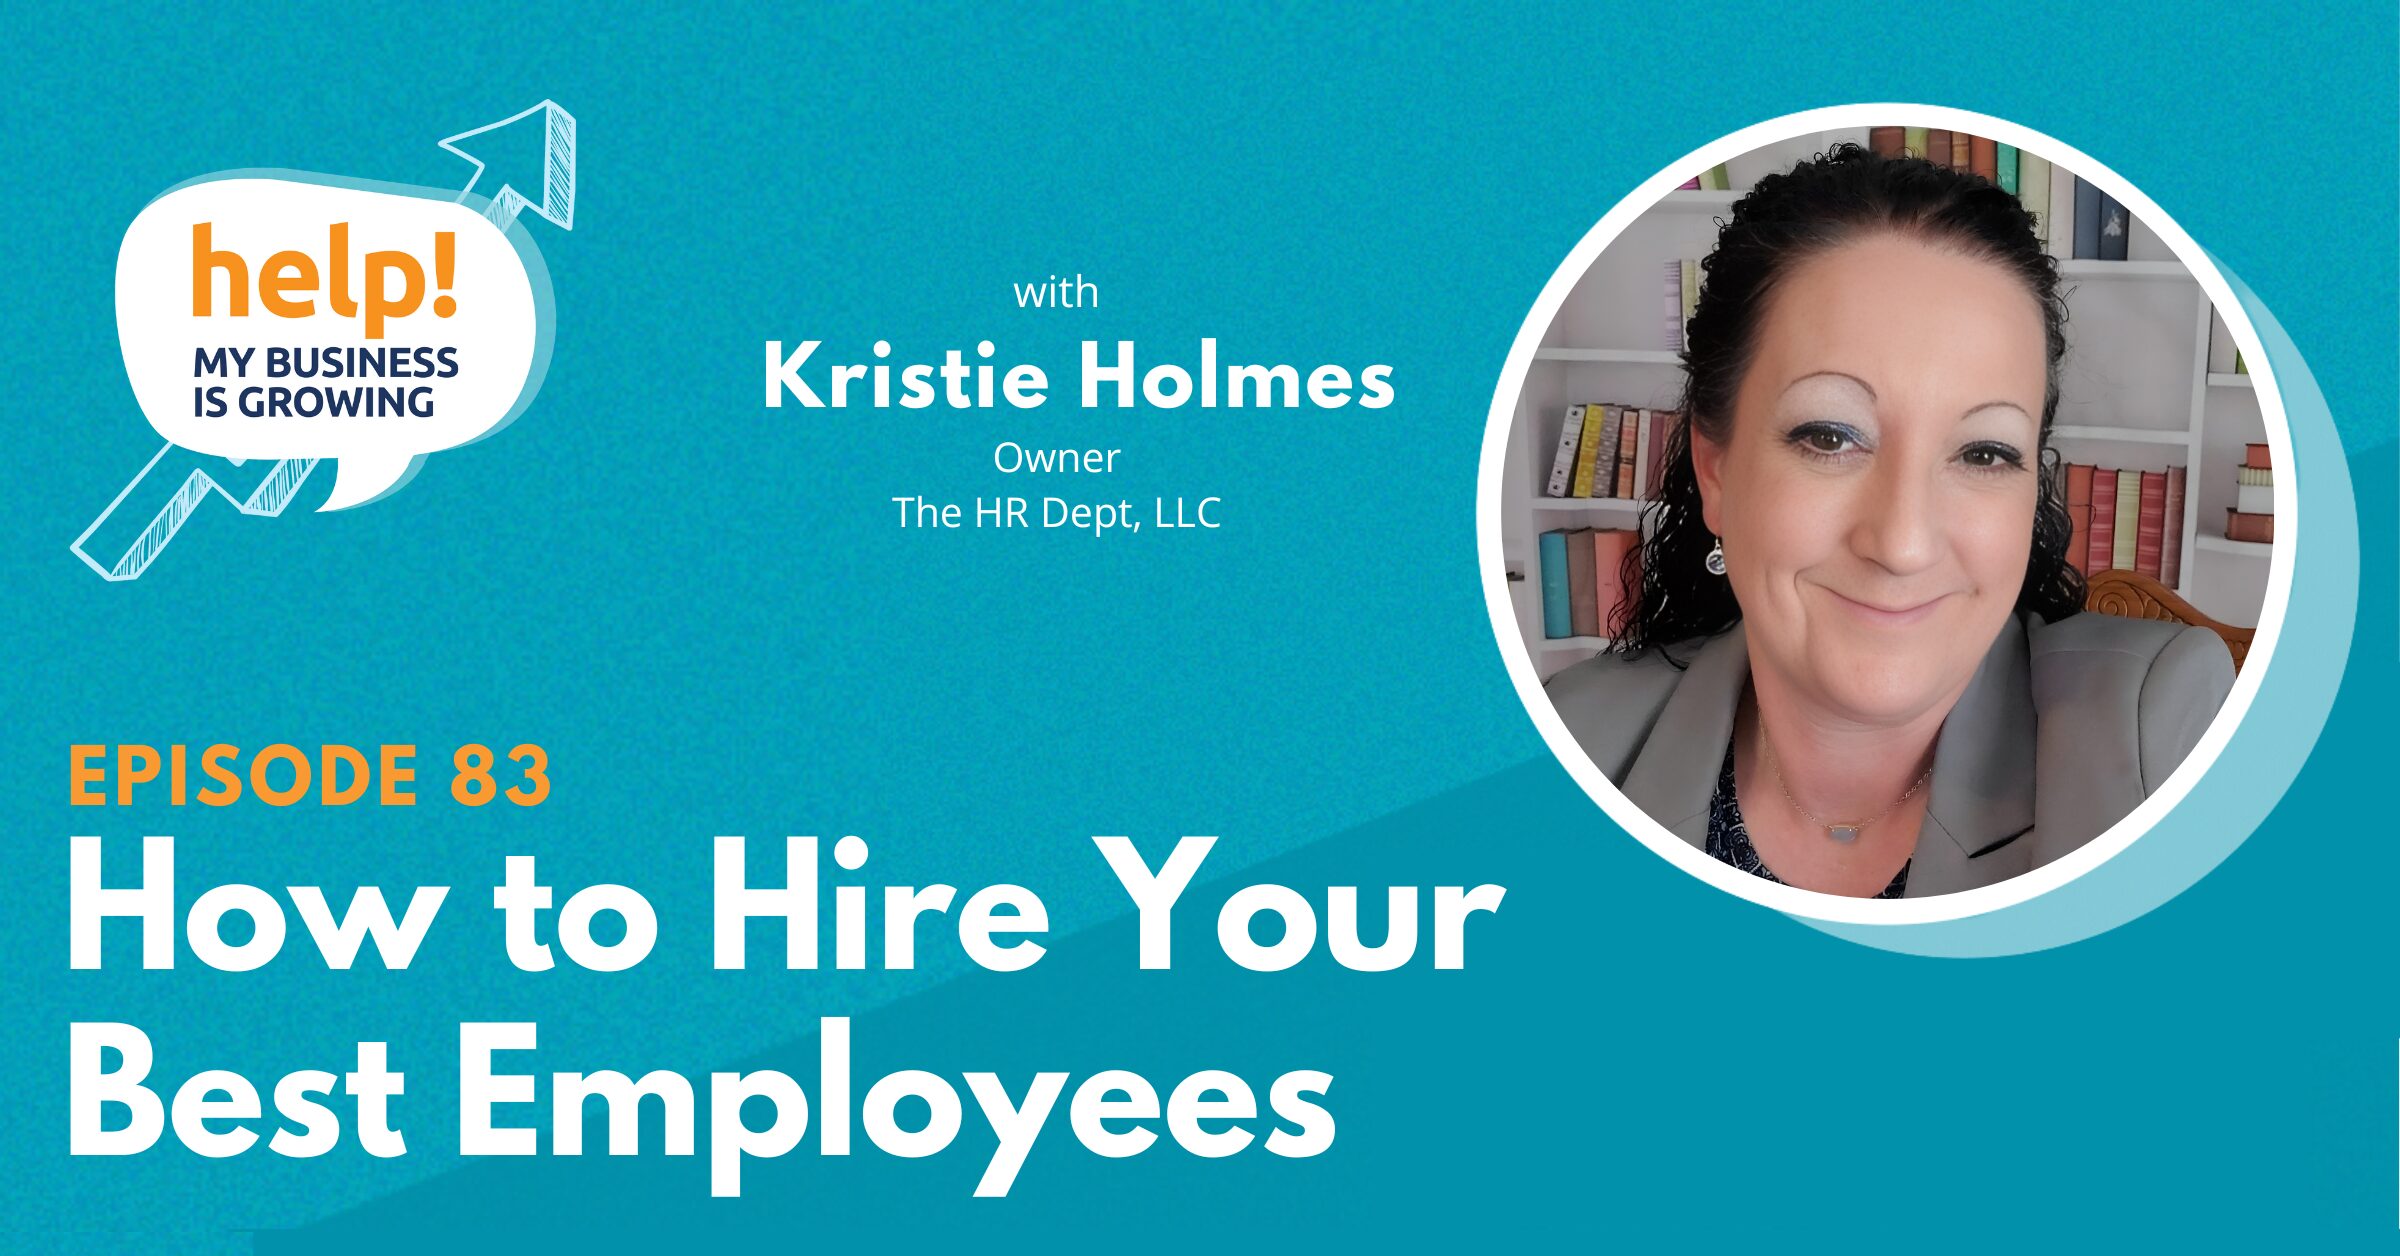  How to Hire Your Best Employees